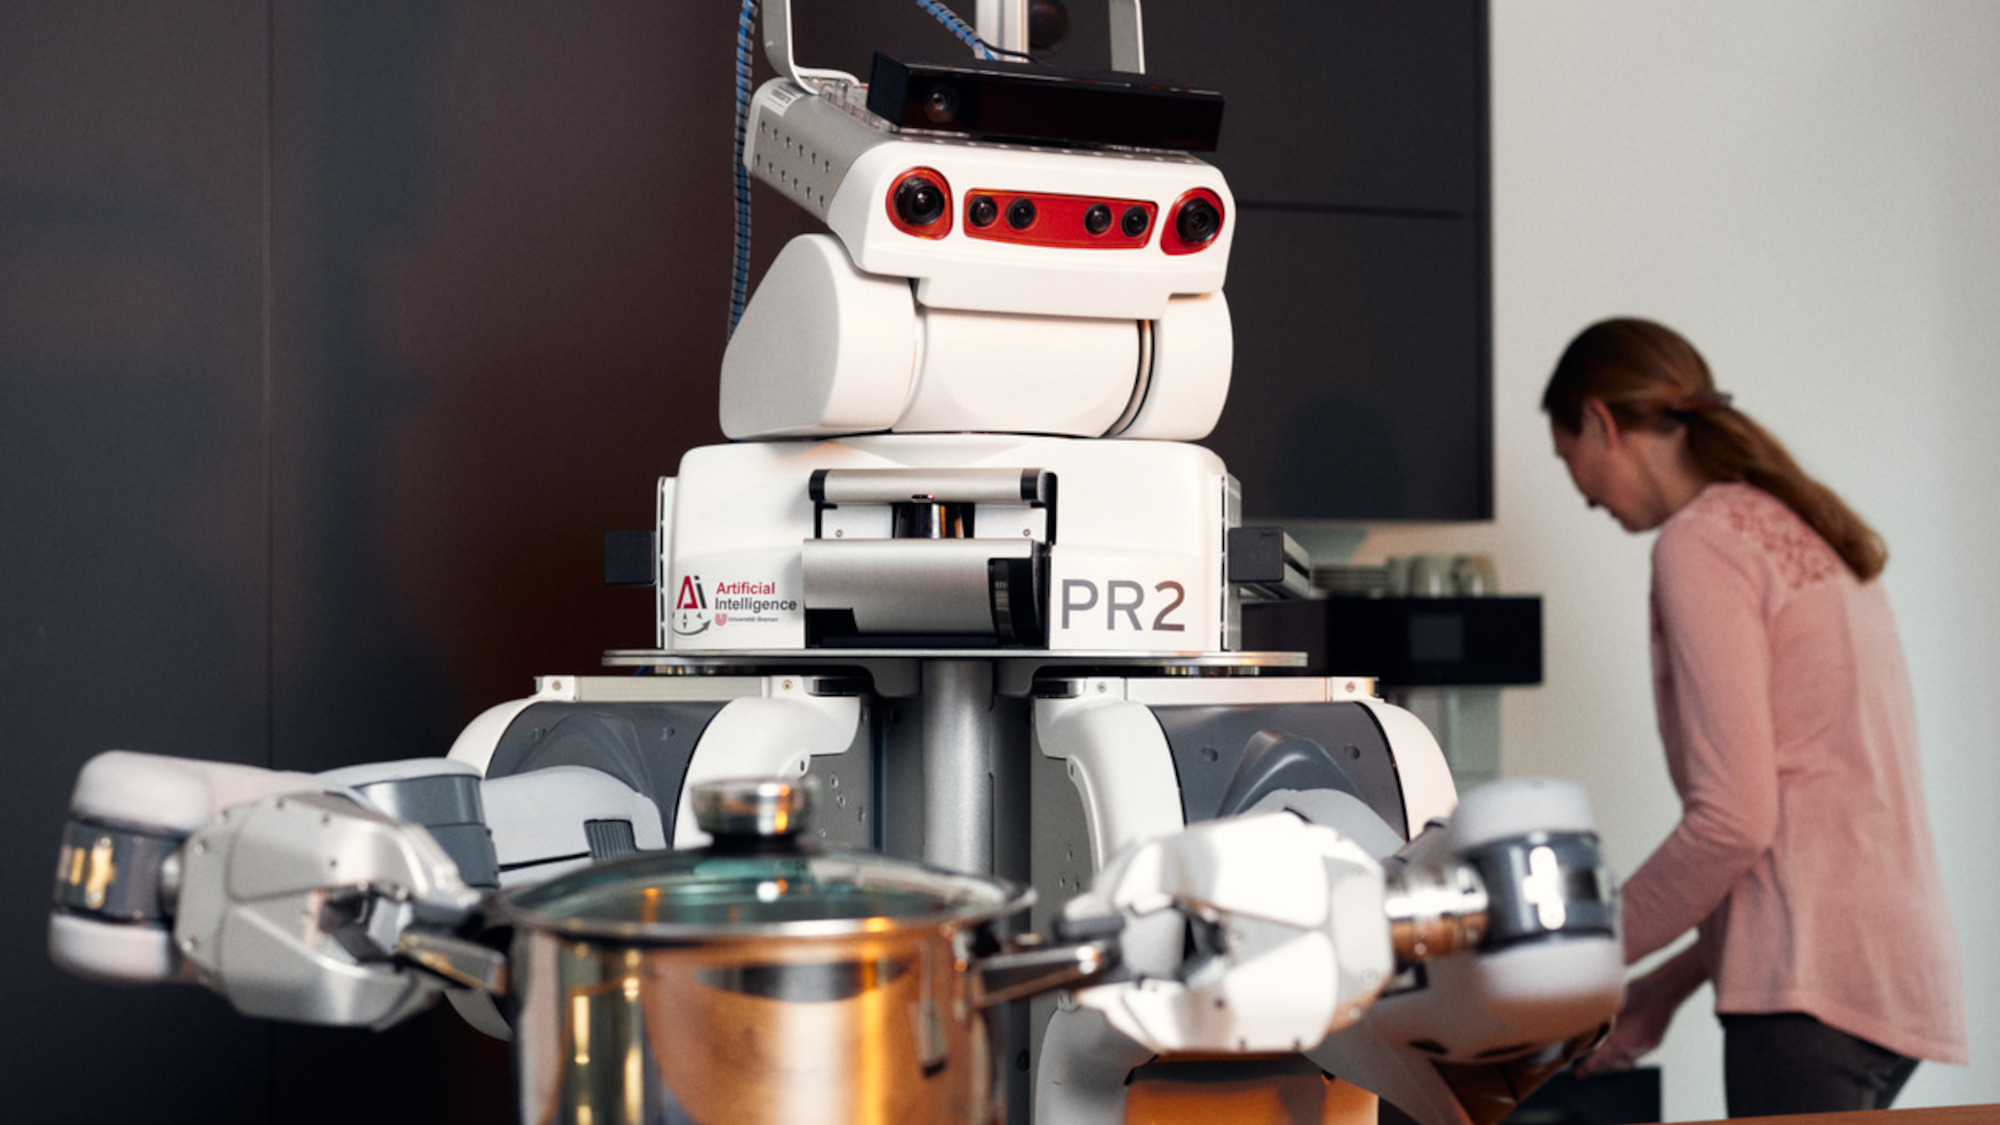 A robot holds a saucepan in its hands. It is helping the woman, who can be seen in the background, to cook.